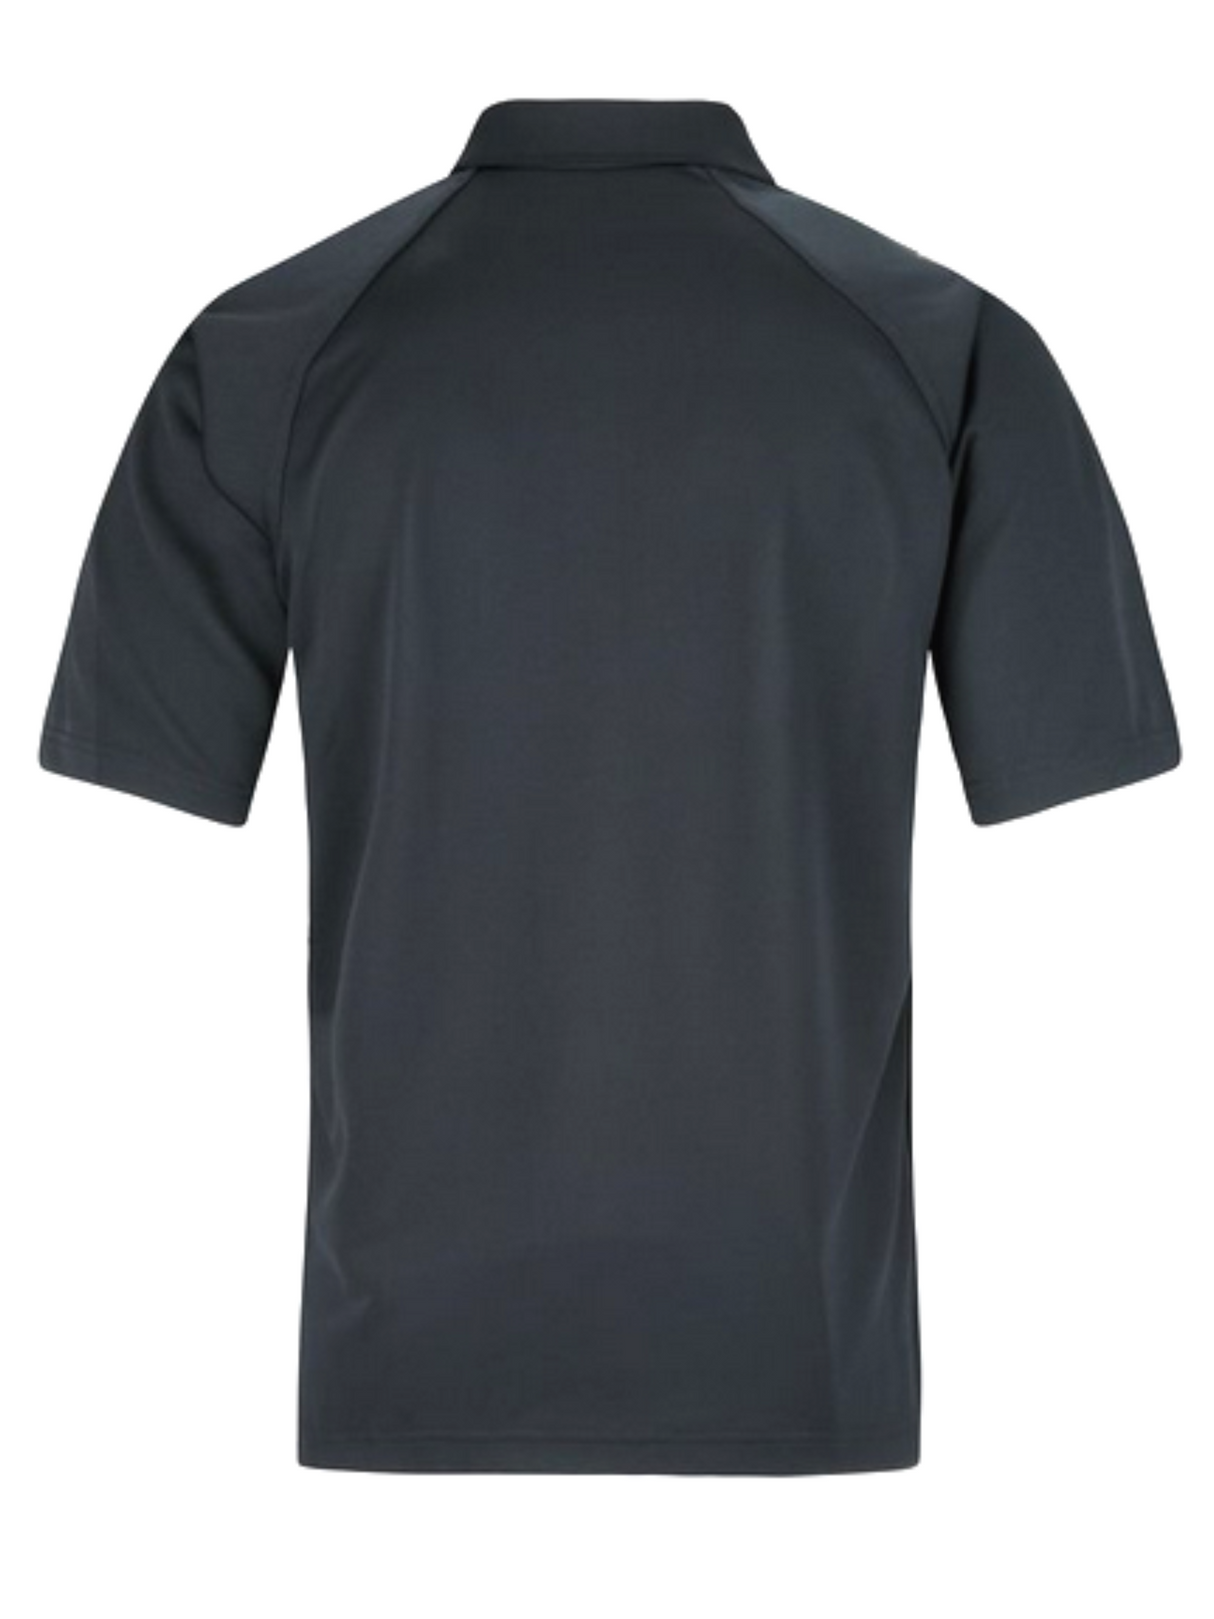 TACTICAL Department of Justice Polo- Men's Short Sleeve - FEDS Apparel